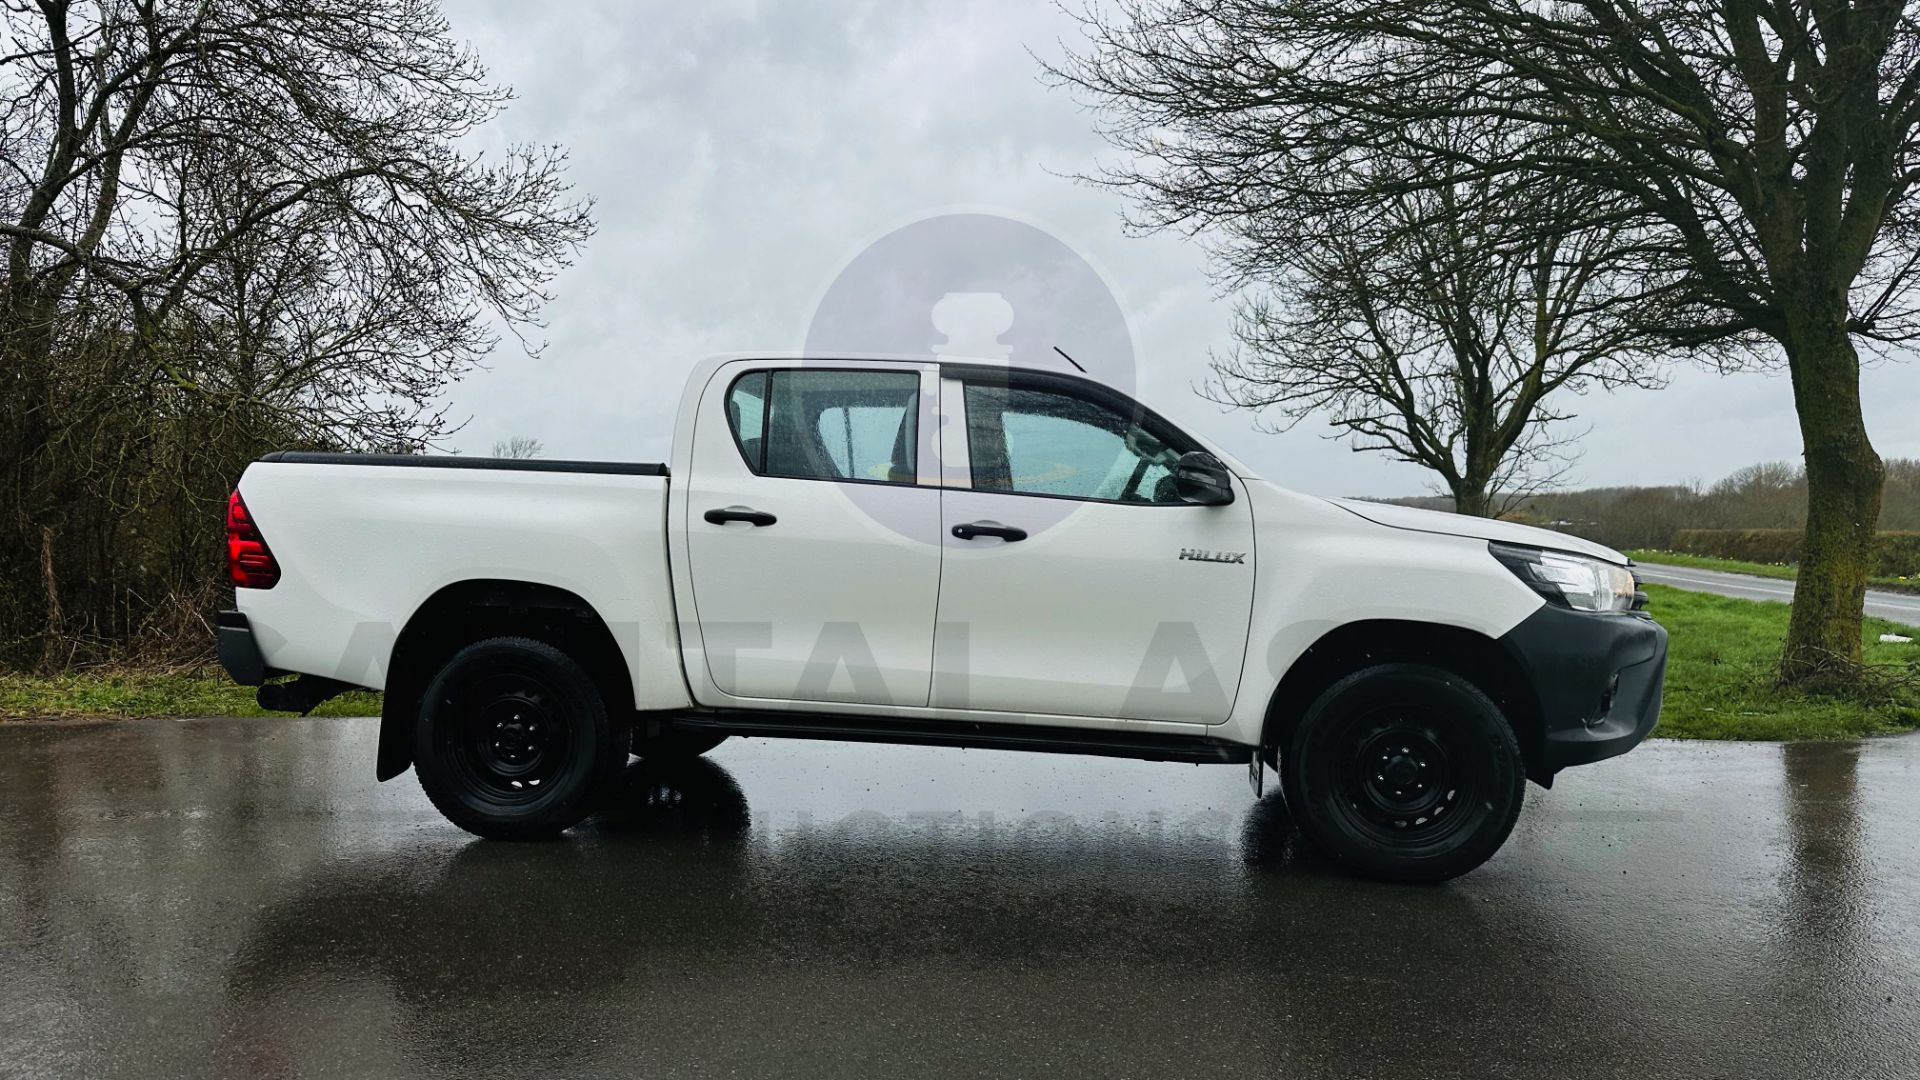 TOYOTA HILUX *DOUBLE CAB PICK-UP* (2020 - EURO 6) 2.4 D-4D - AUTO STOP/START *AIR CON* (1 OWNER) - Image 18 of 48